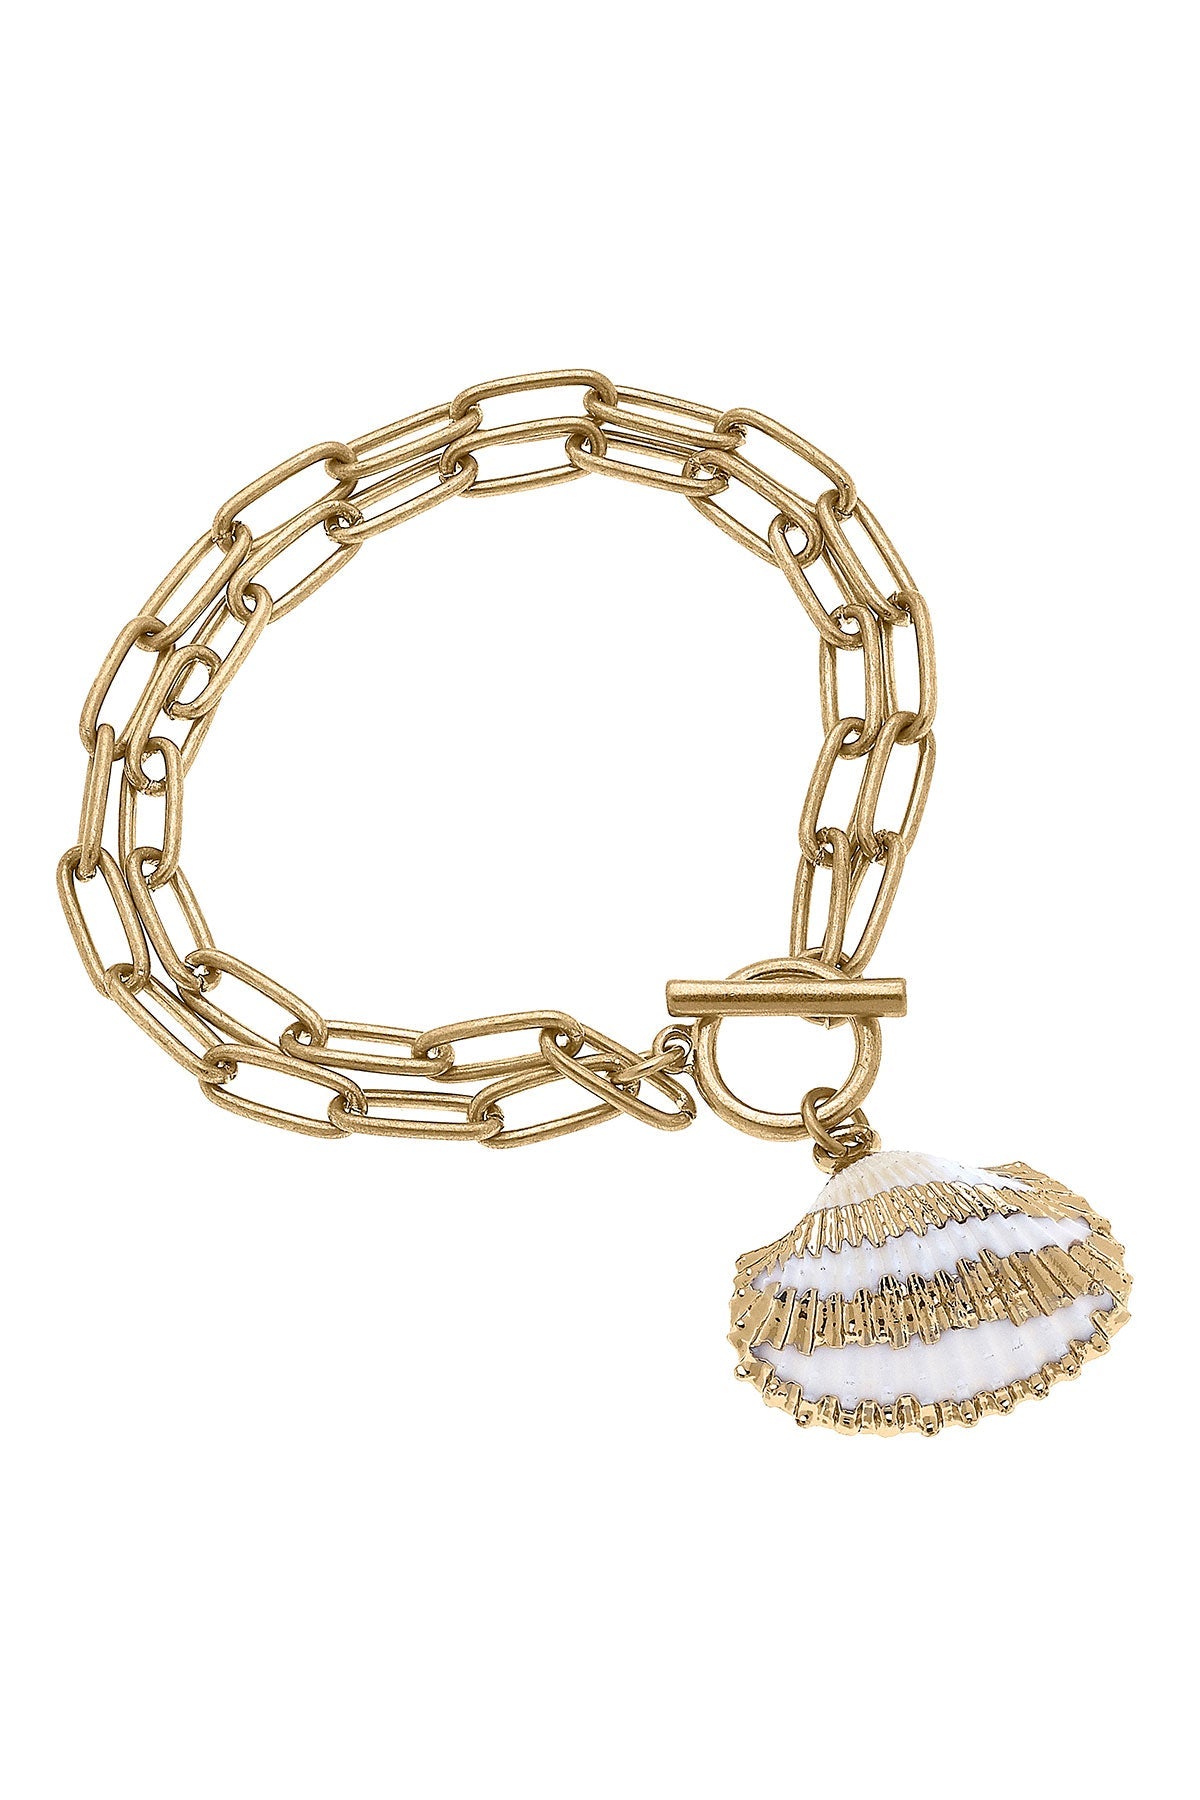 Mia Gold-Dipped Cockle Shell T-Bar Bracelet in Ivory